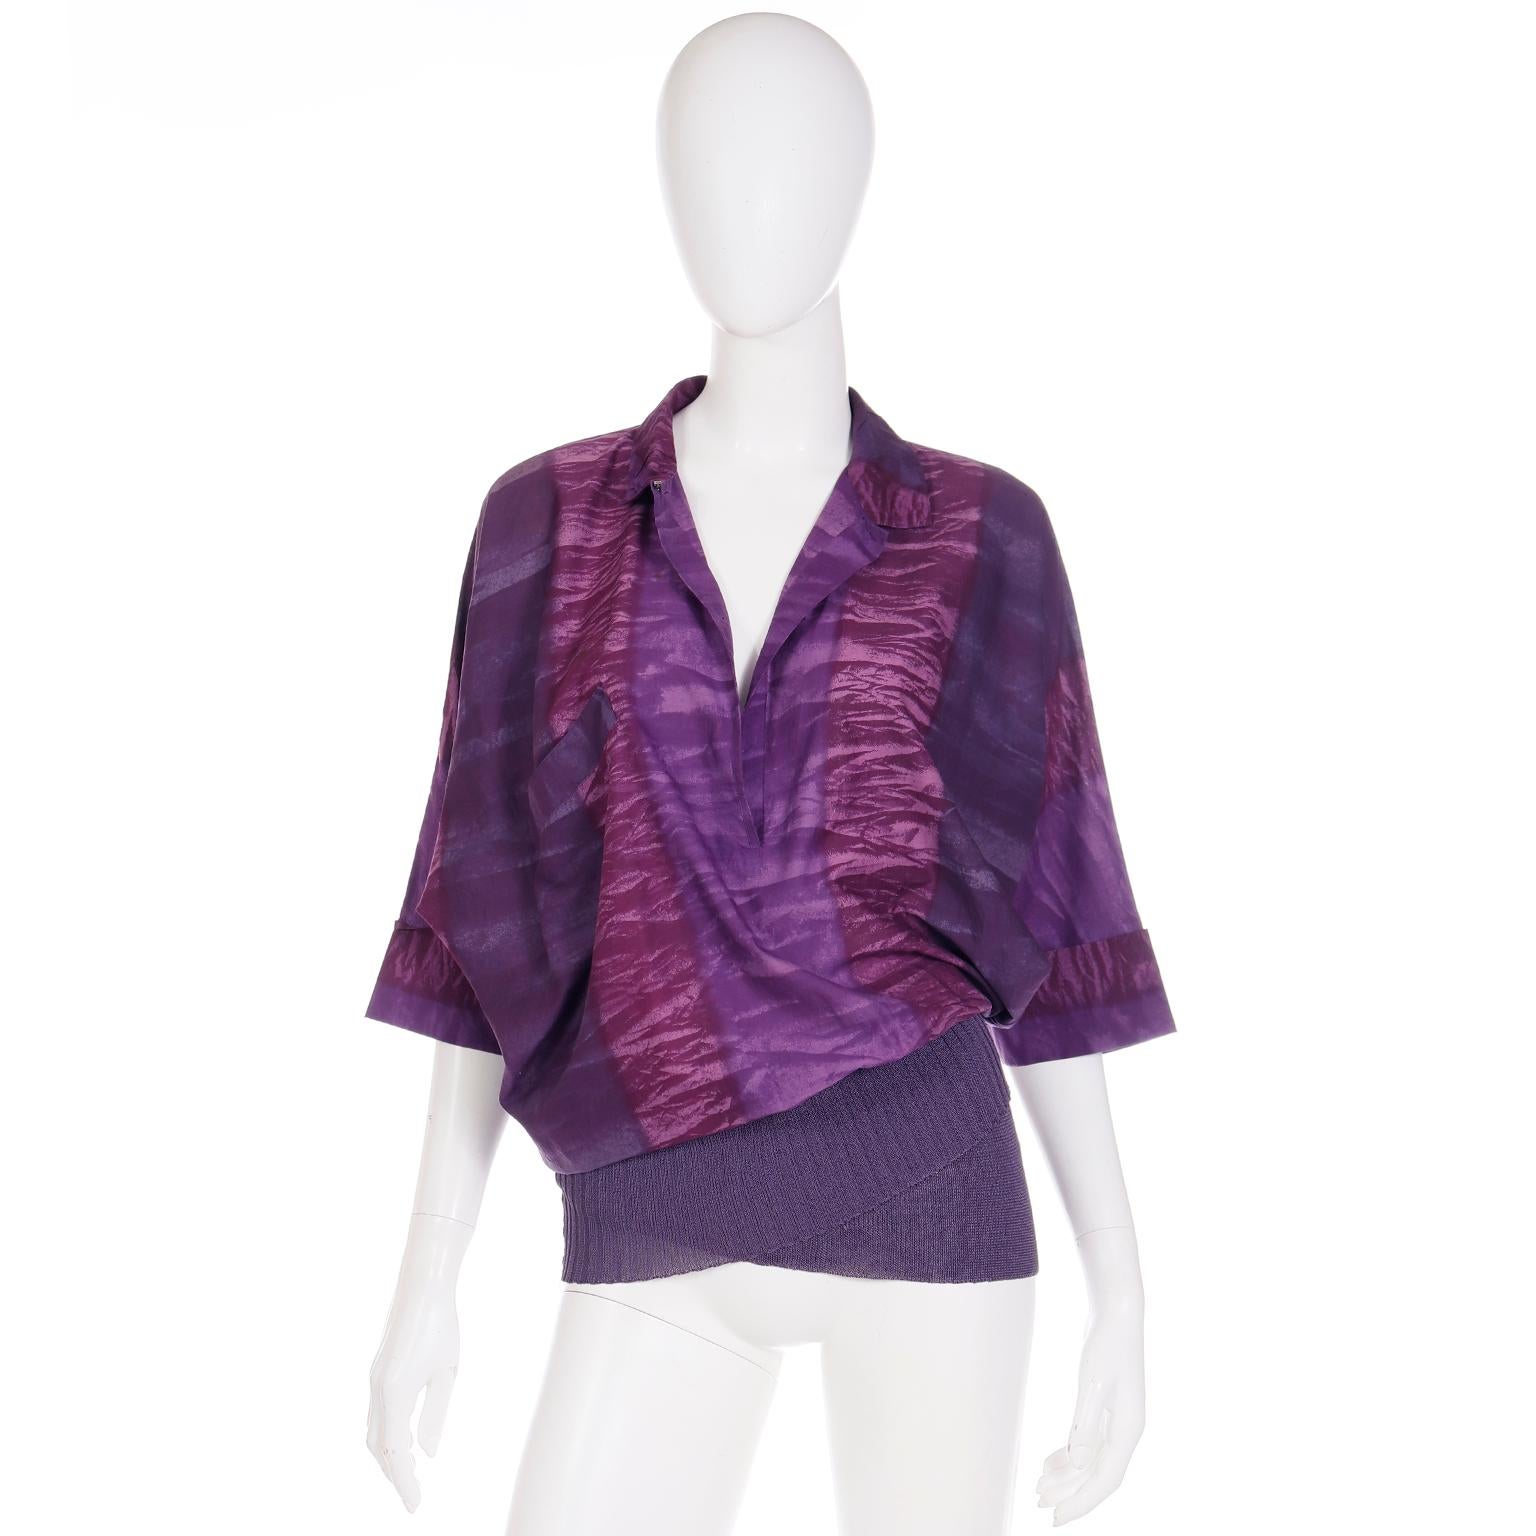 This rare vintage piece from Gianni Versace is an asymmetrical top in a fun abstract purple print. What makes this shirt special is the overlapping asymmetrical stretch knit hem! Such a unique technique that adds so much style to the top! There are